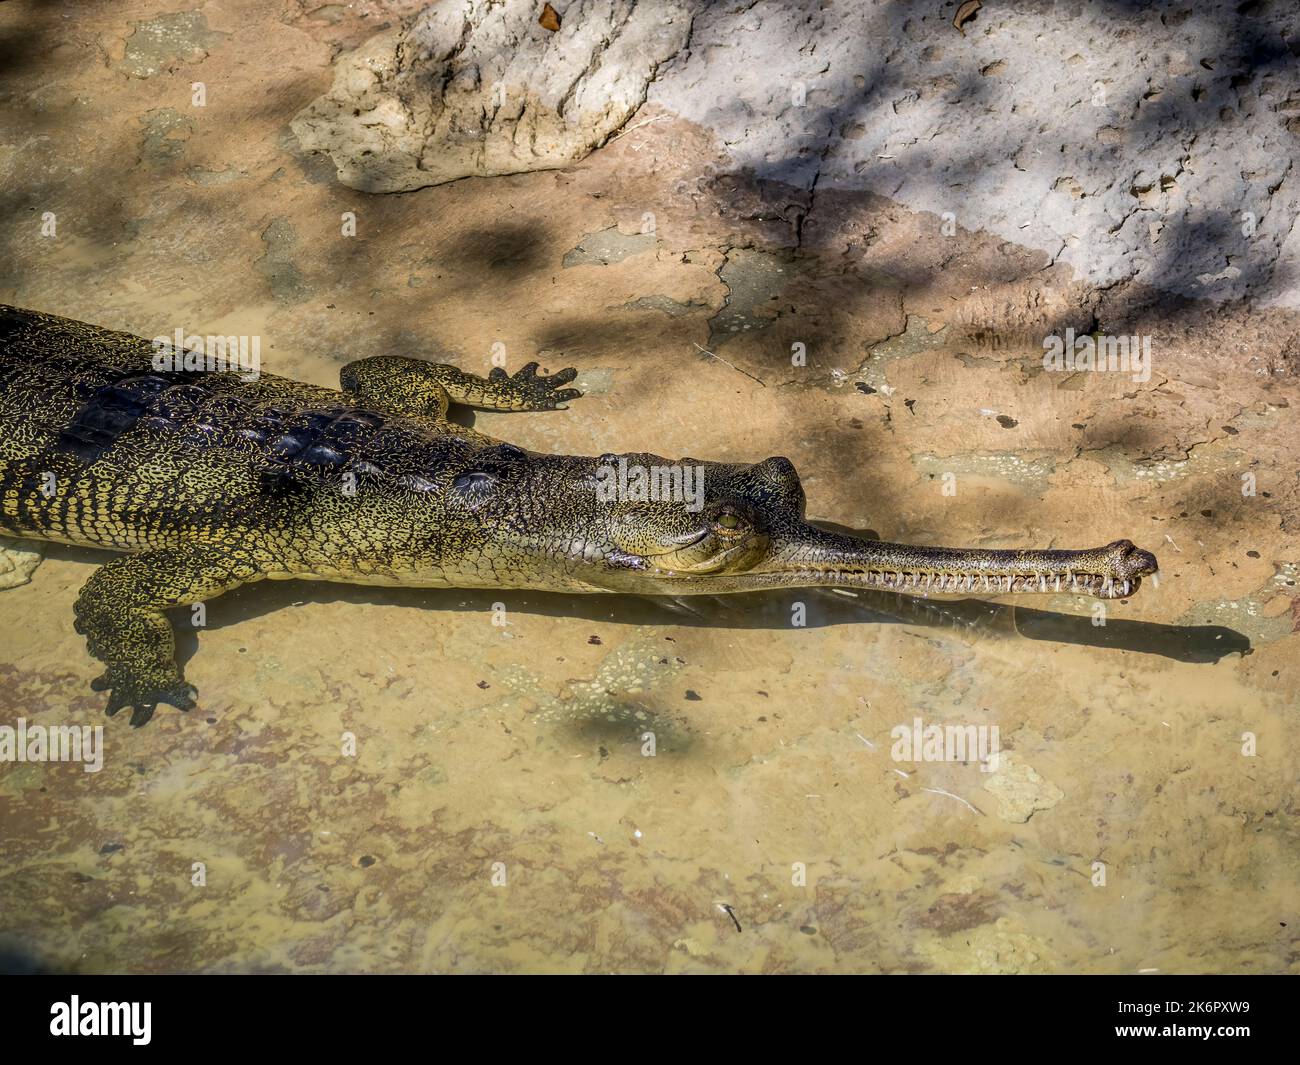 Indian Gharial (Gavialis gangeticus) also known as gavial or fish-eating crocodile, Stock Photo